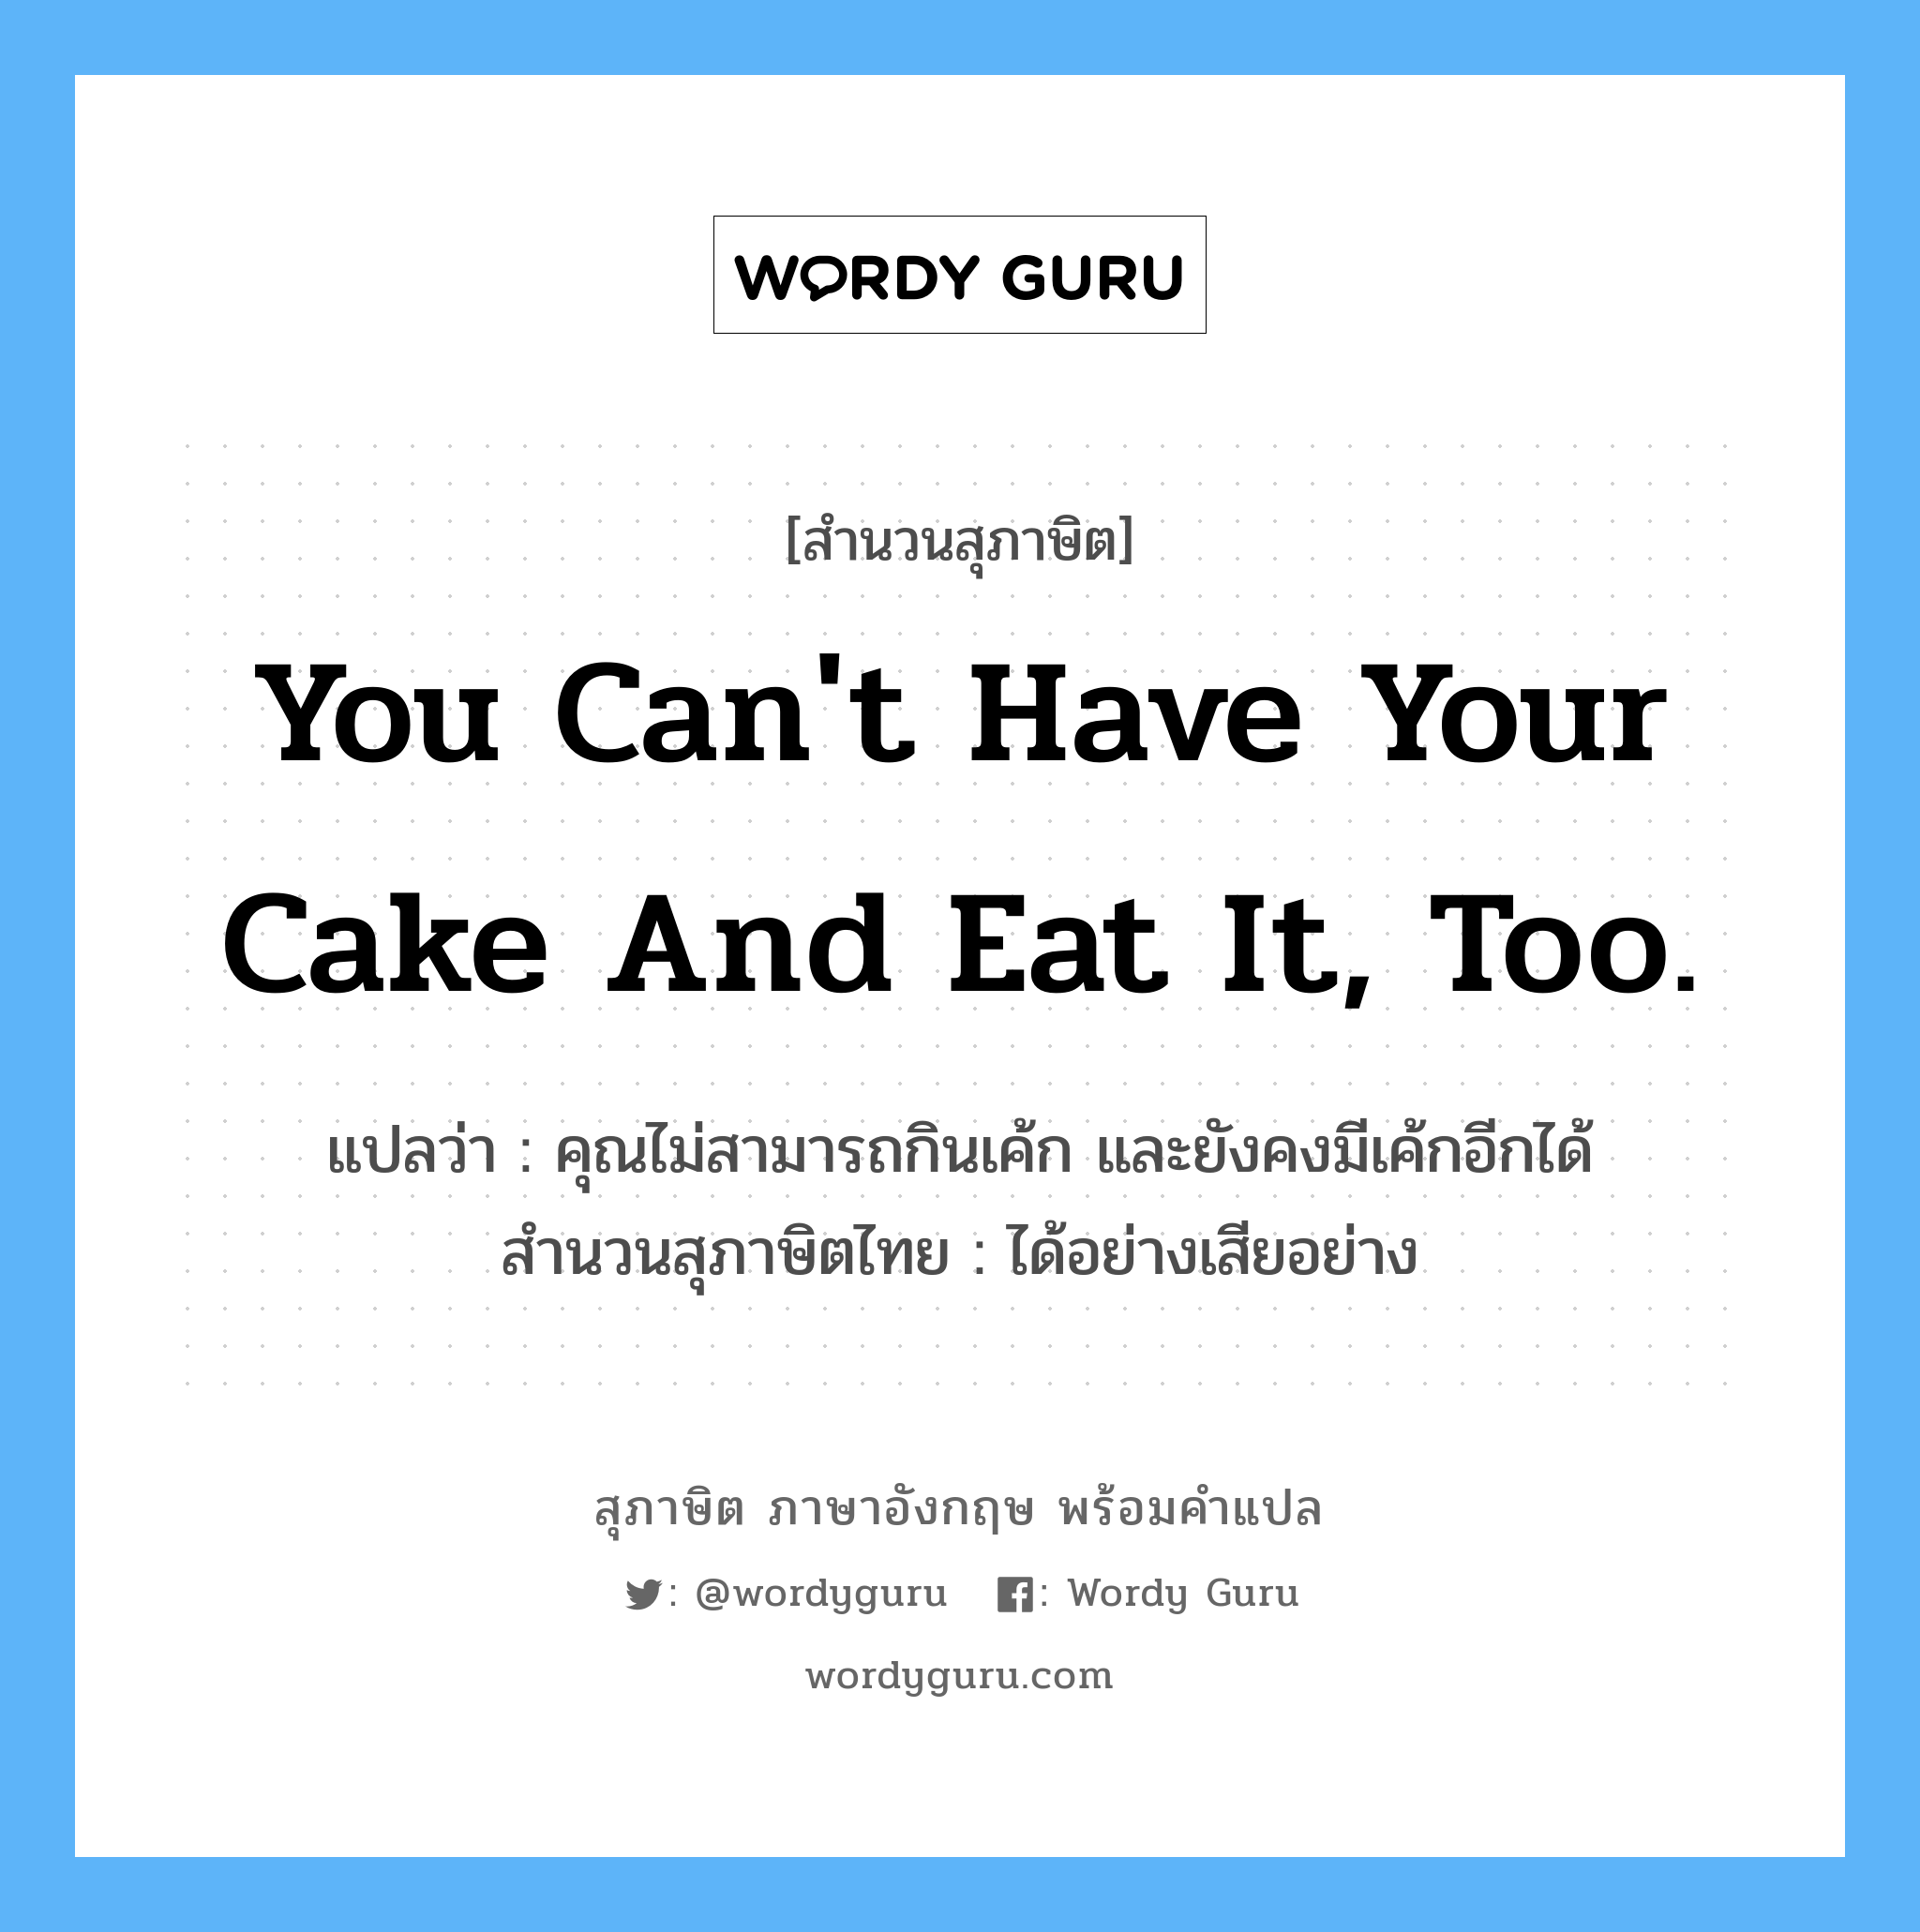 You can't have your cake and eat it, too.